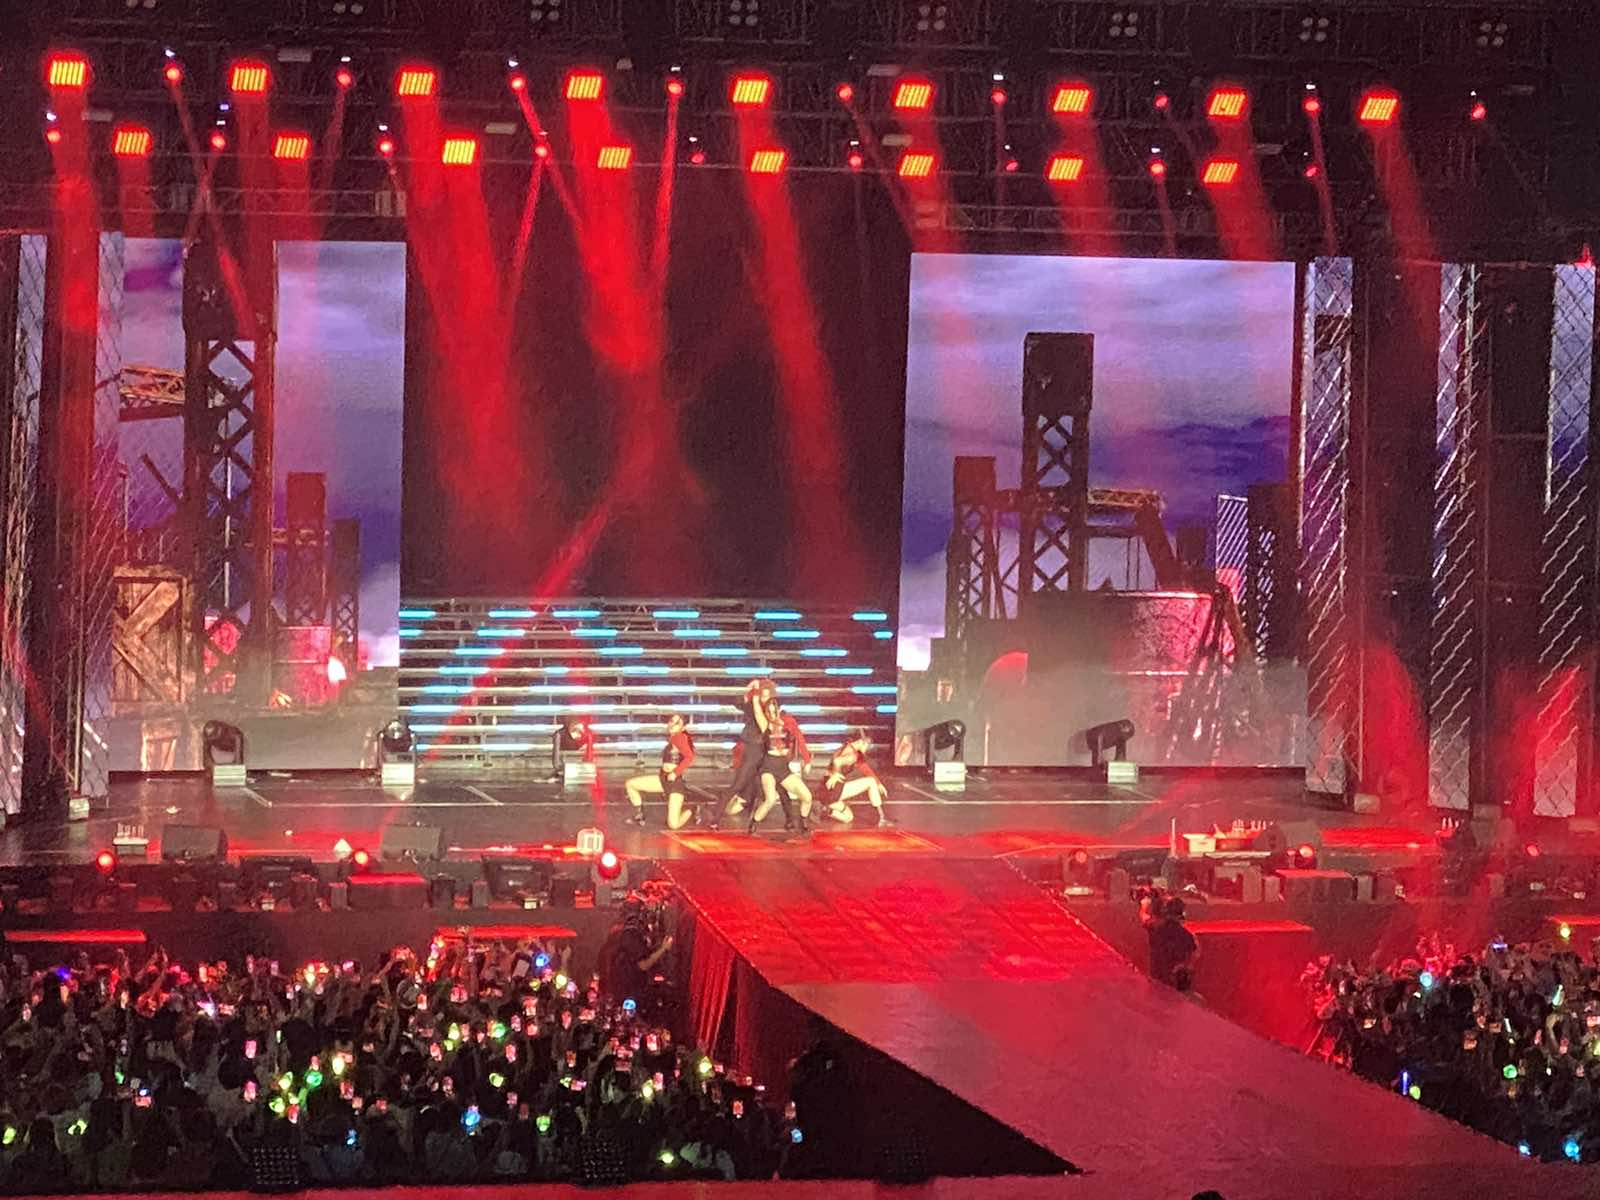 Jackson Wang performed 4 songs from his upcoming album “Magic Man” during the “2022 K-pop Masterz in Manila” held at the Mall of Asia Arena last July 29.